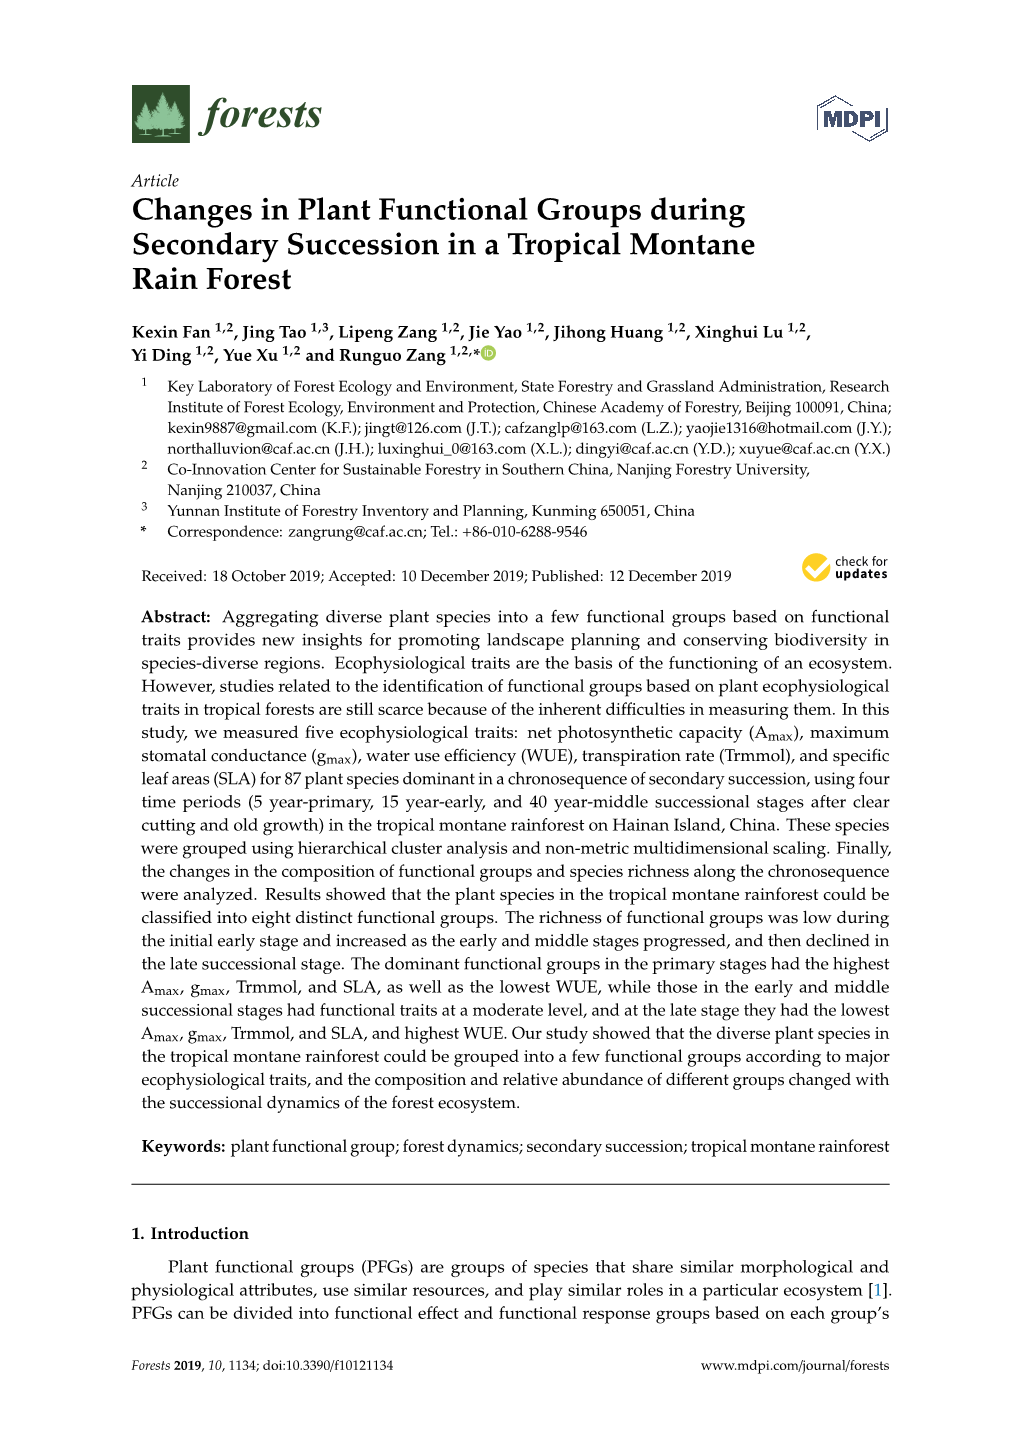 Changes in Plant Functional Groups During Secondary Succession in a Tropical Montane Rain Forest